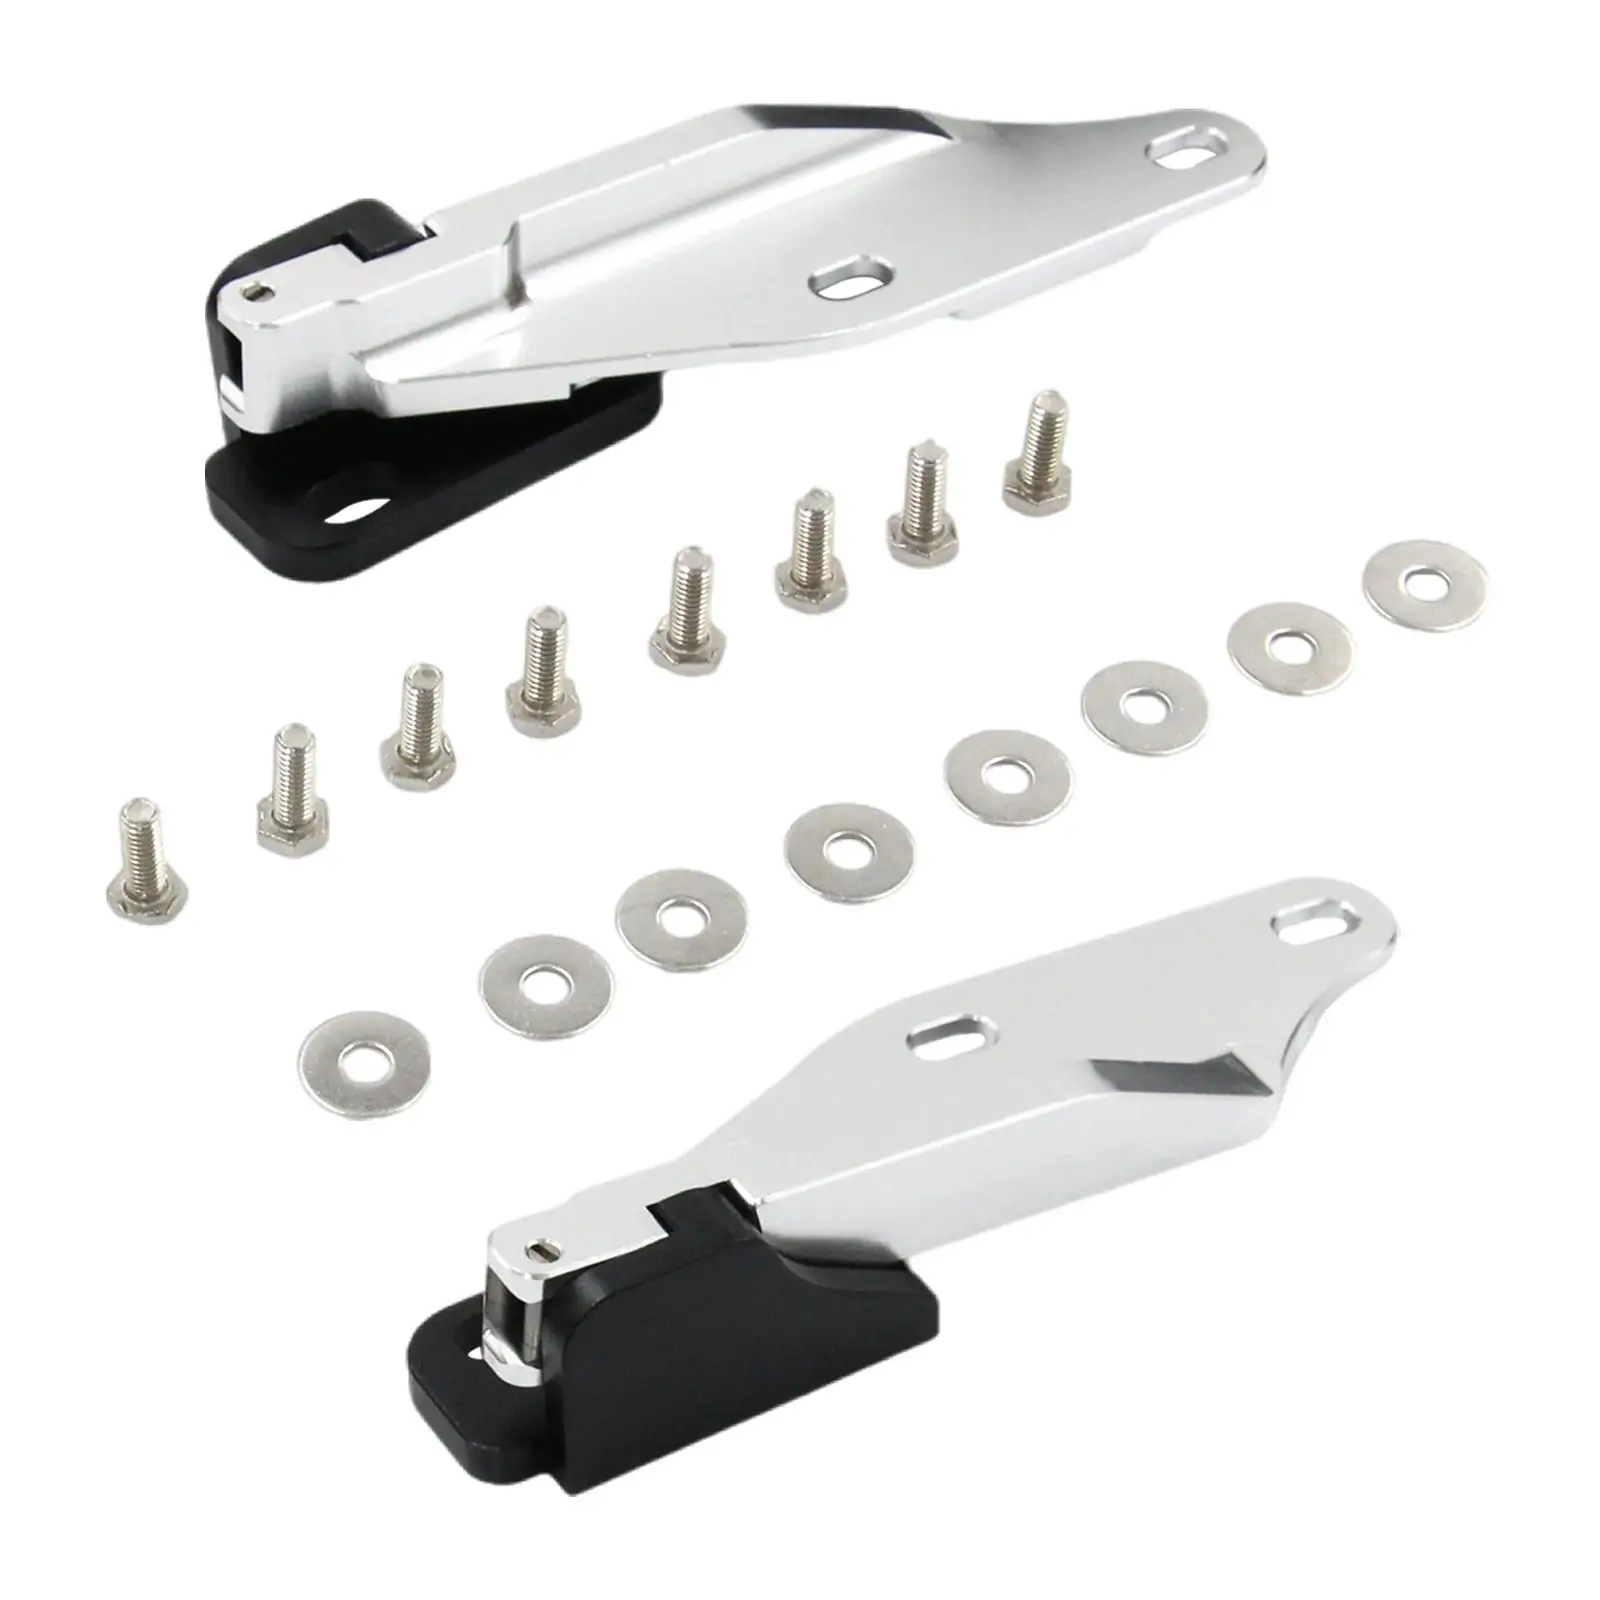 2Pcs Quick Release Hood Hinge Bonnet Latch Durable with Screws Gaskets Vehicle Accessories for Honda CRV RD Repair Upgrade